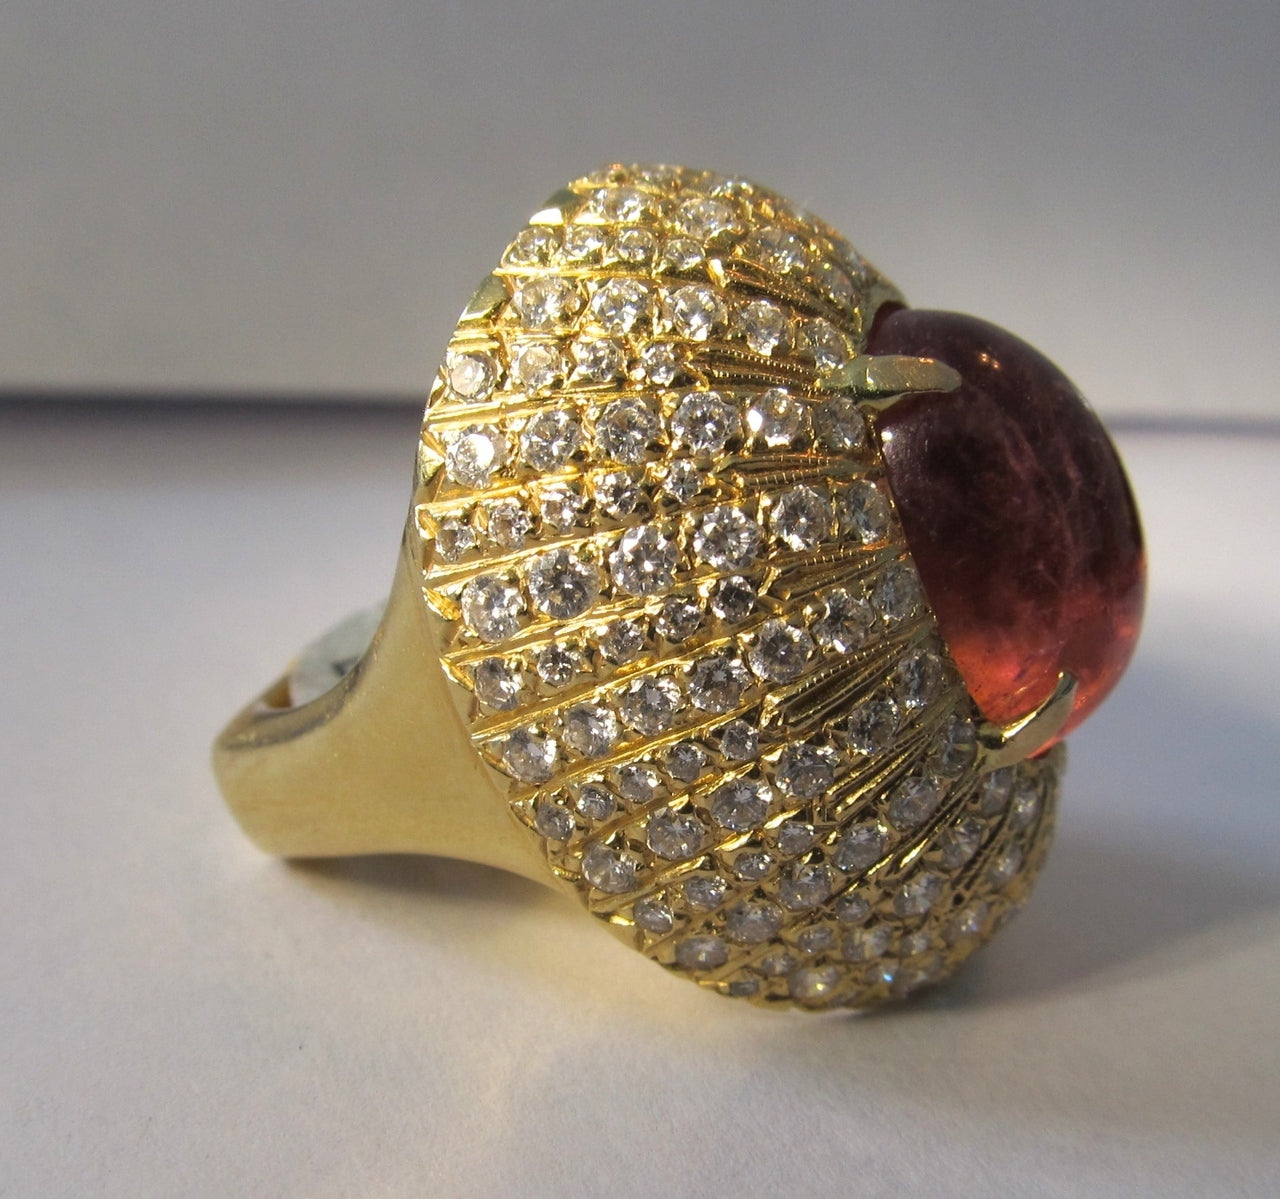 18k yellow gold ring with an 8ct pink tourmaline and 2cts in diamonds, VS1-2 F-G